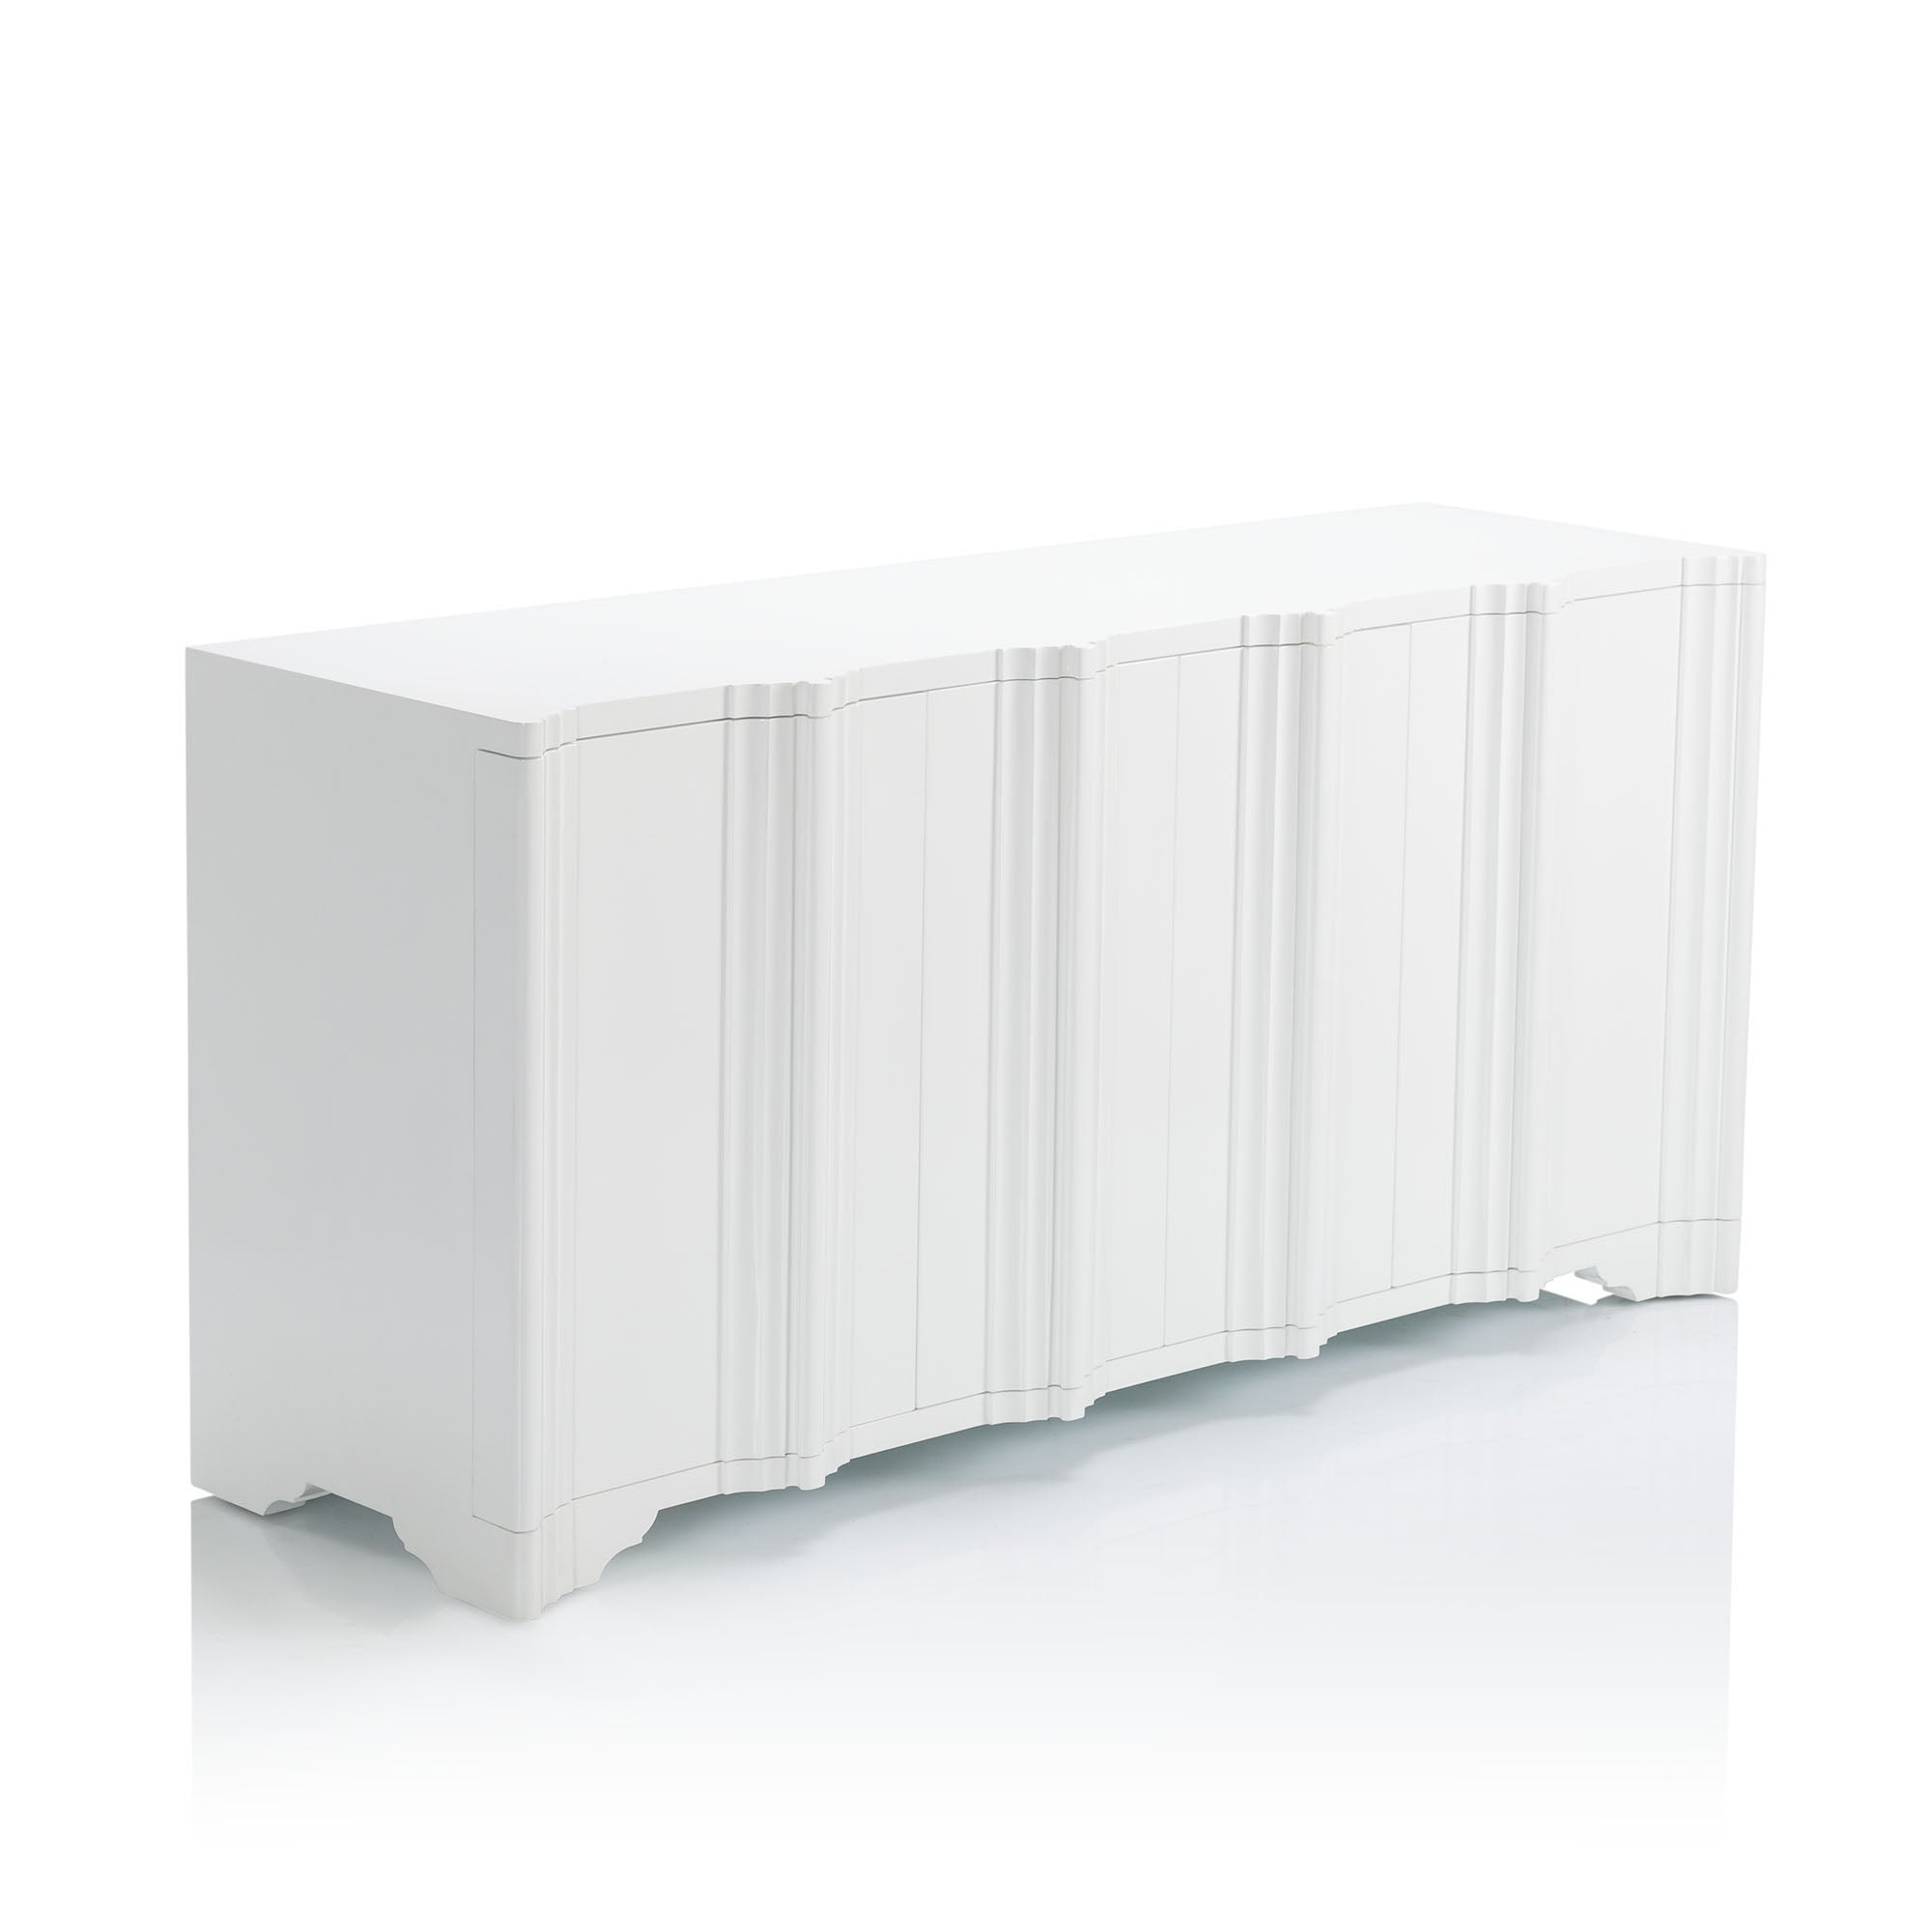 angel view of white enamel buffet storage case with scalloped detail